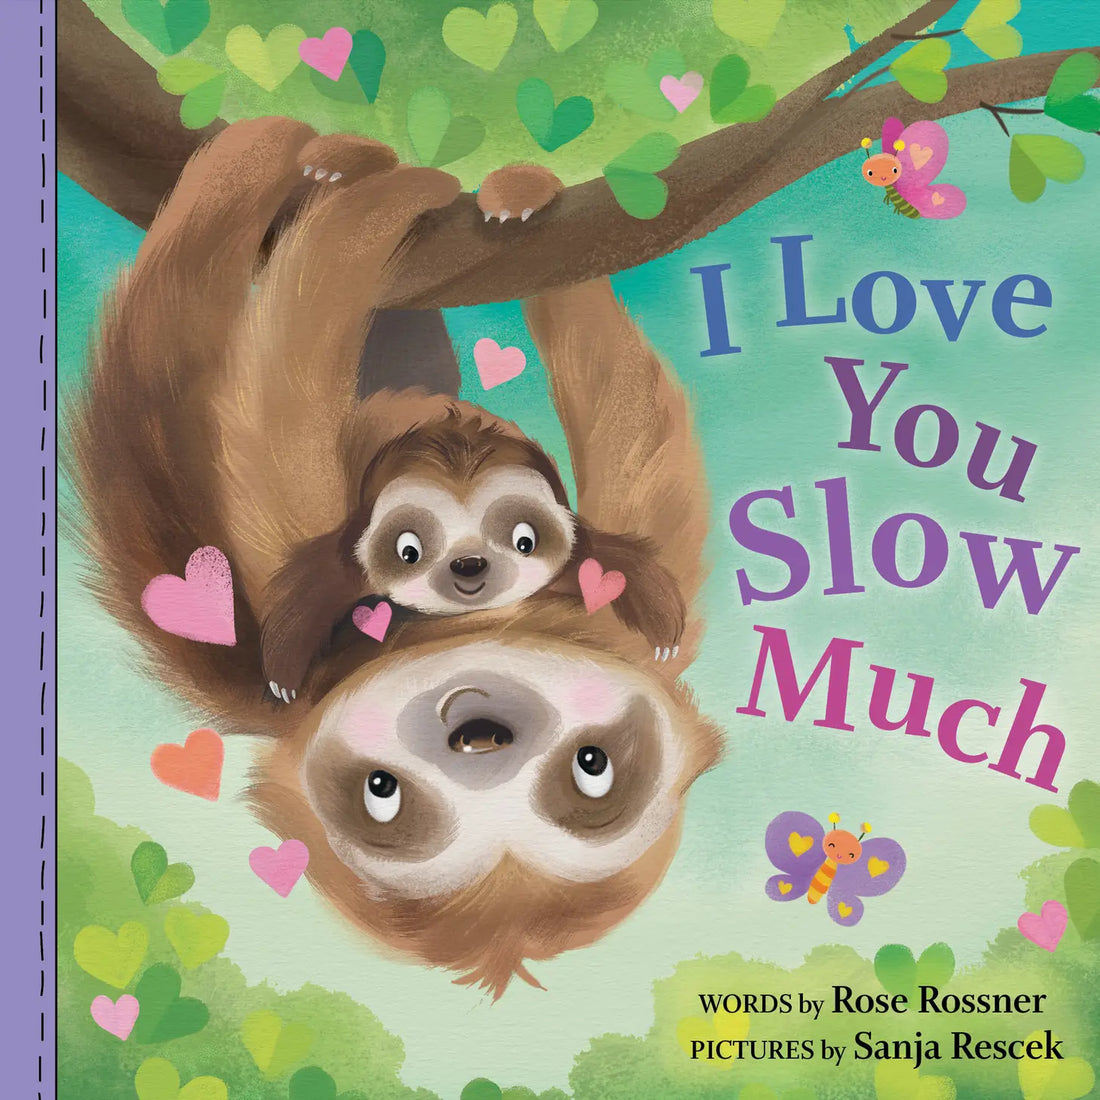 I Love You Slow Much Book